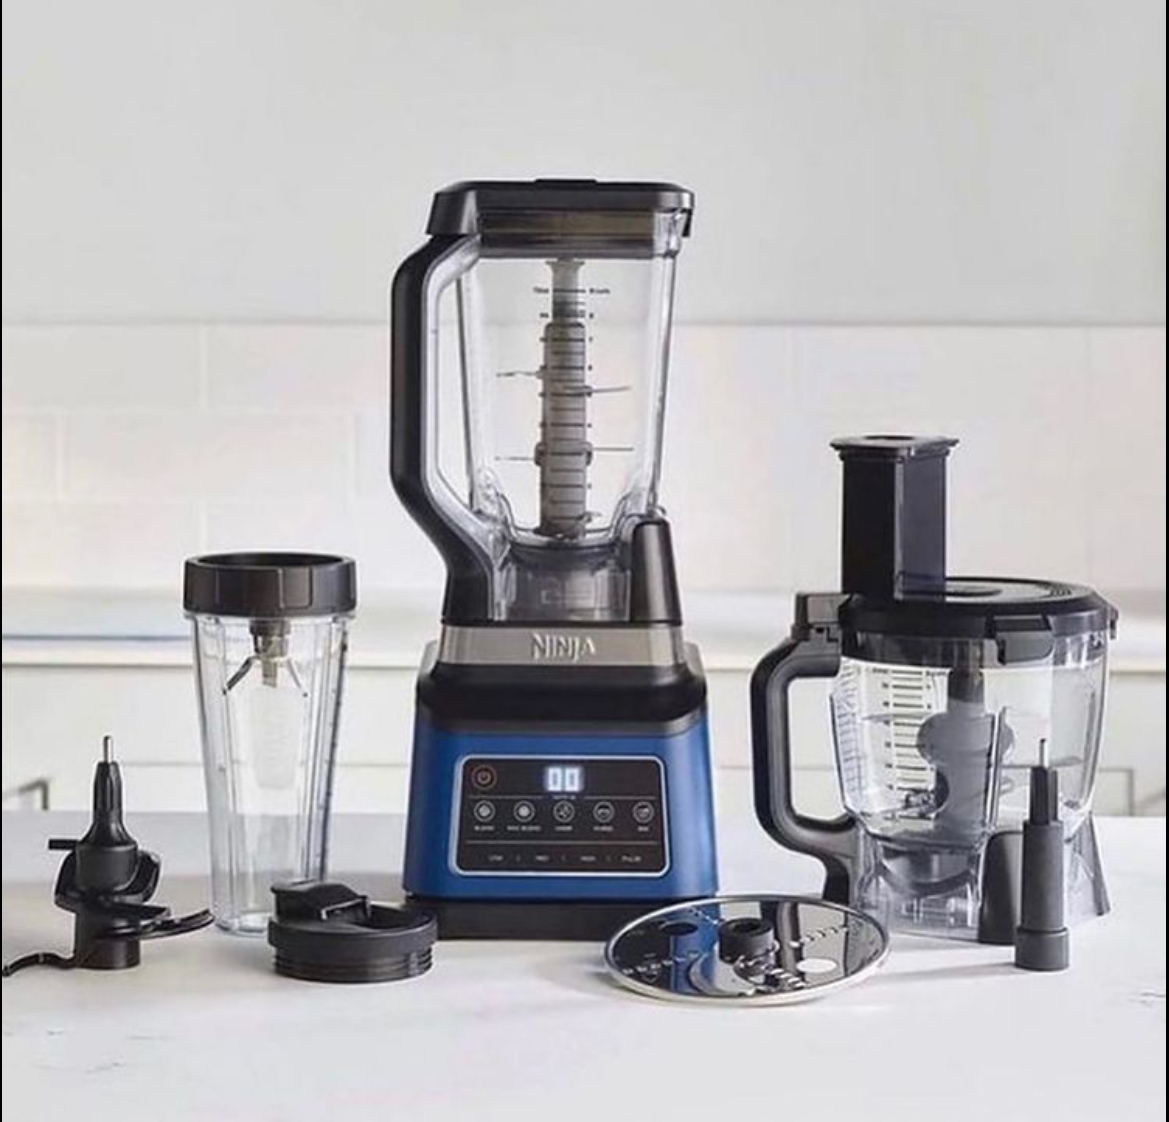 Ninja 3-in-1 Food Processor with Auto-IQ review